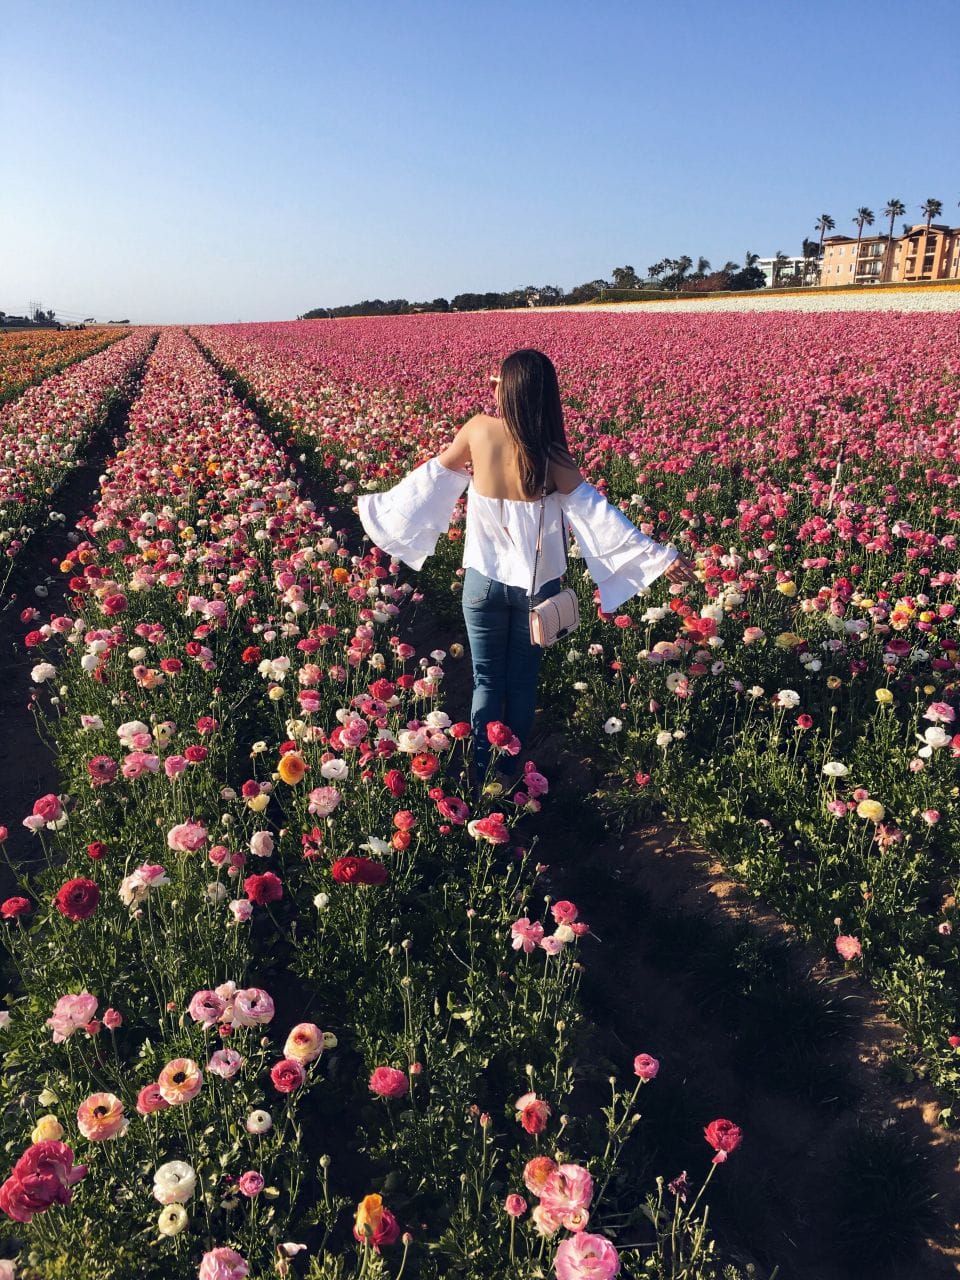 See San Diego's Flower Fields at Carlsbad Ranch